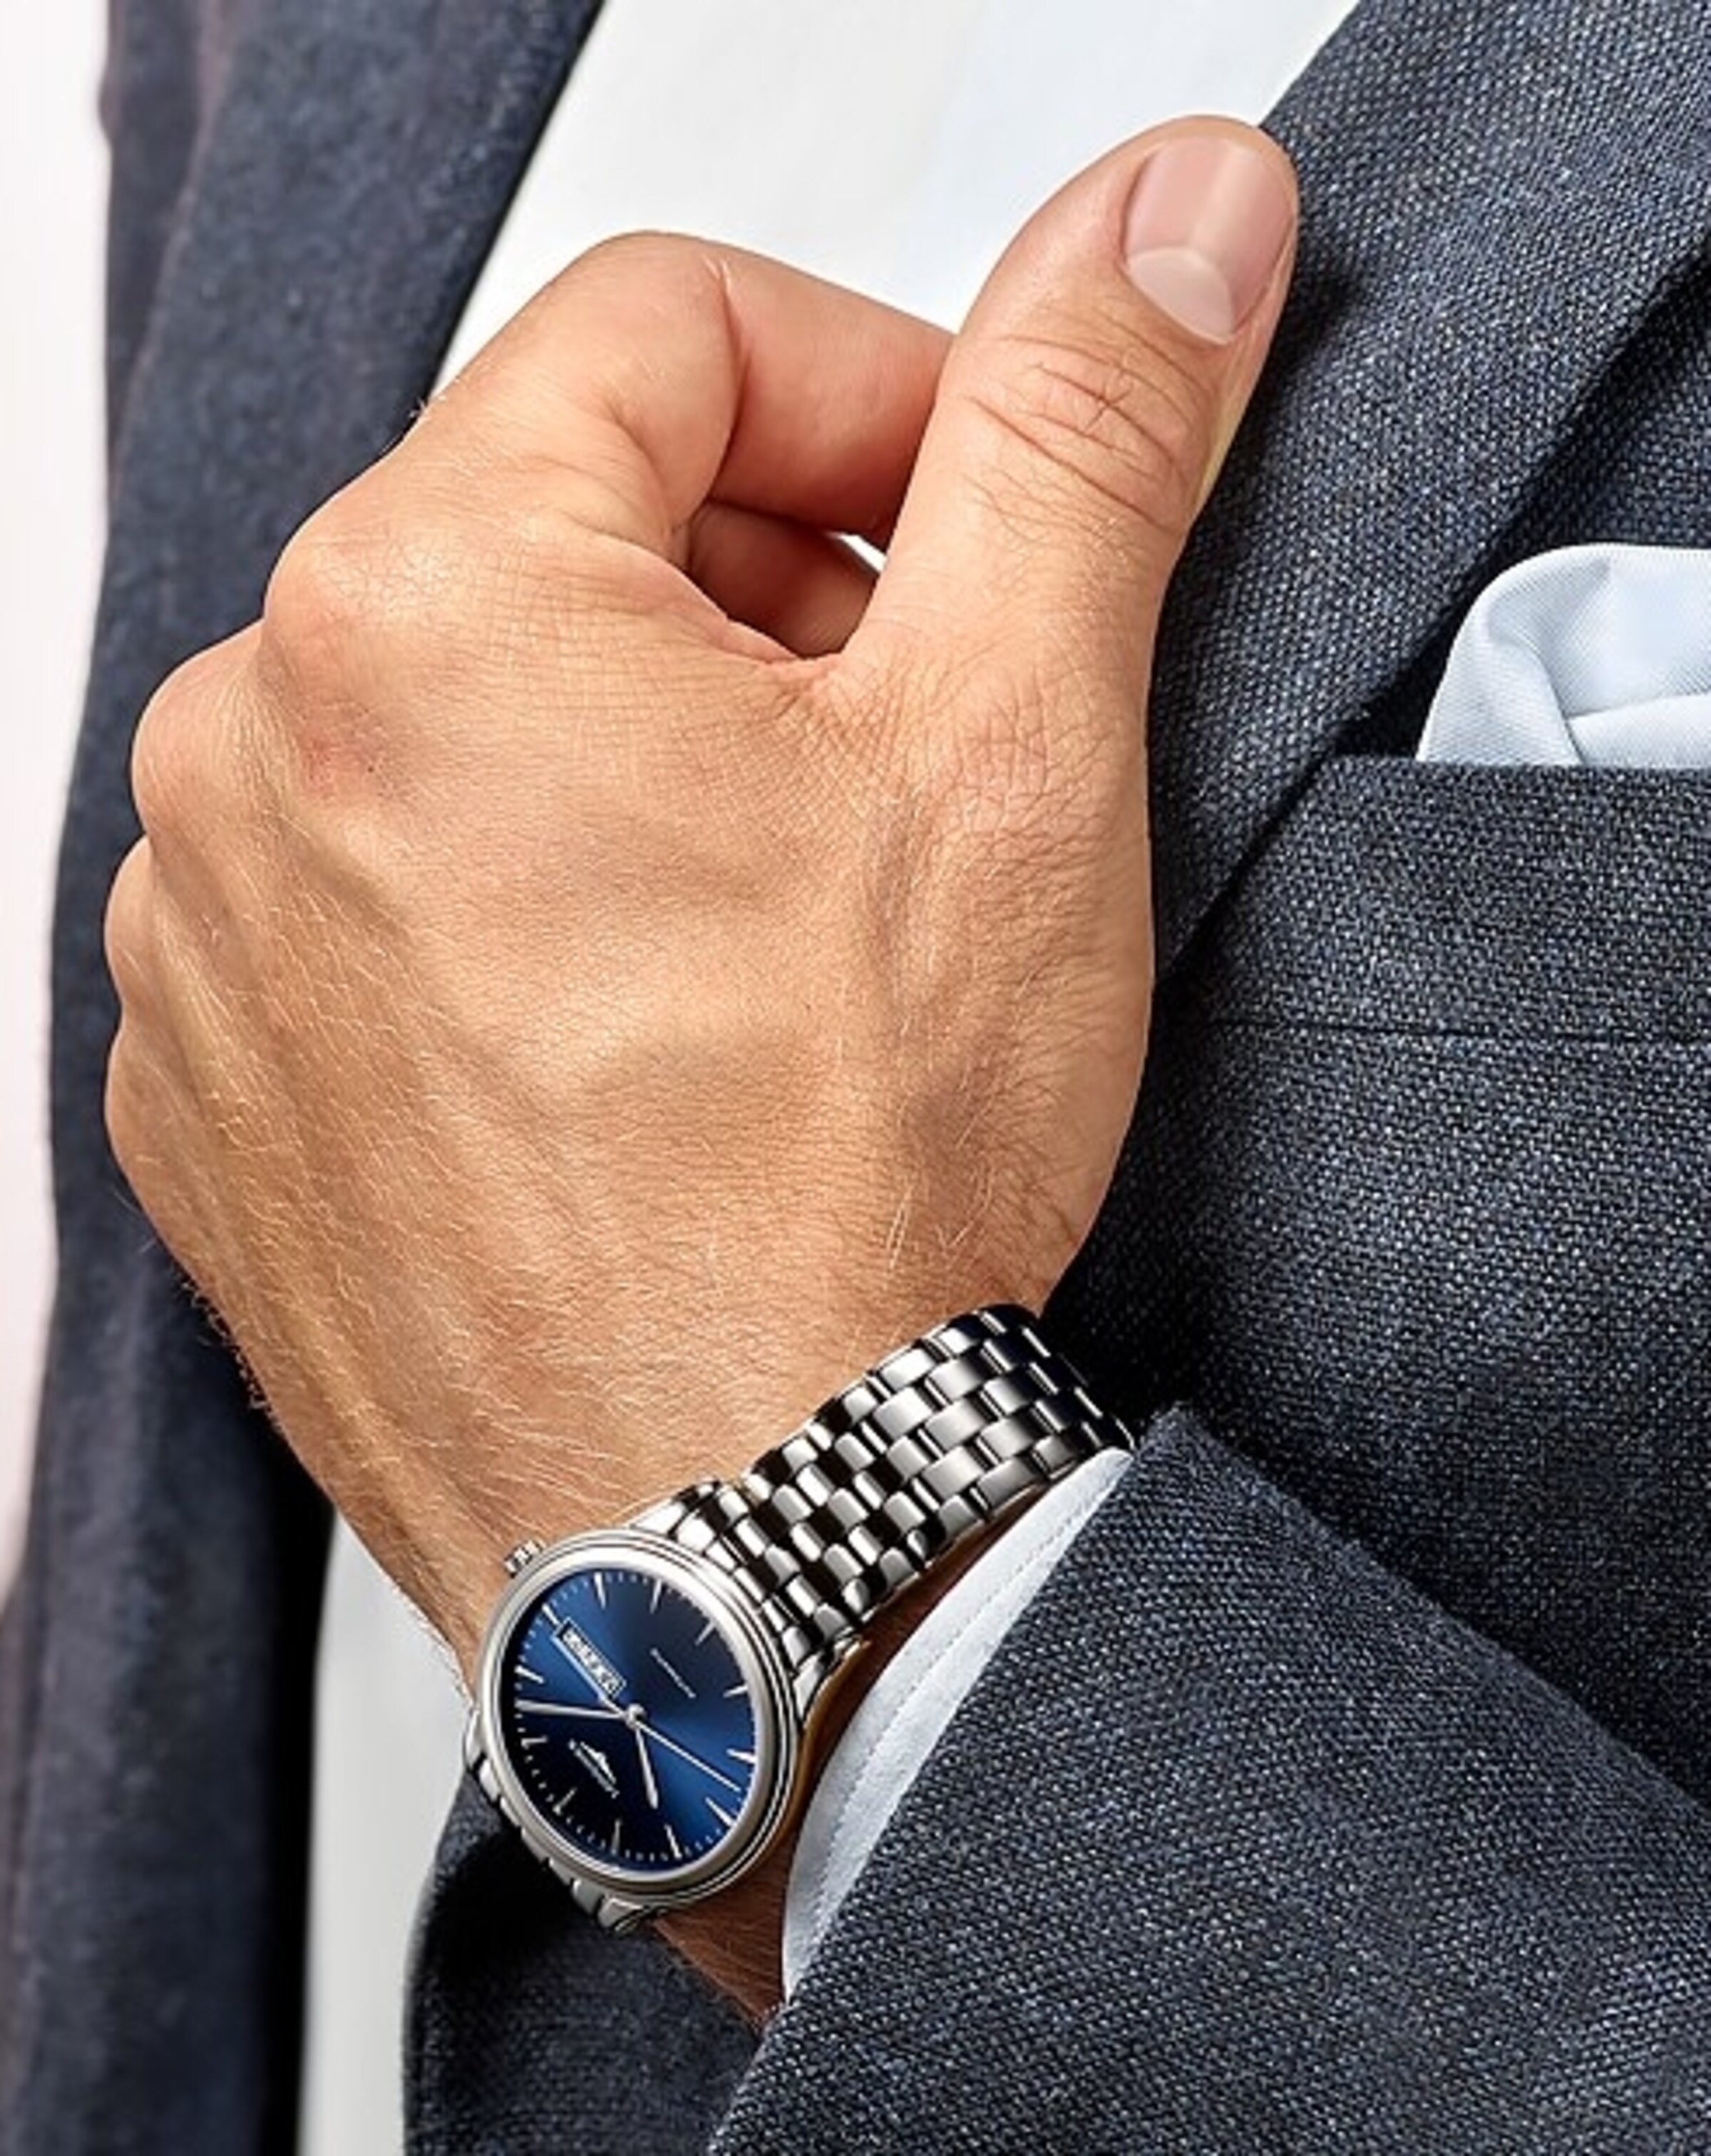 a Longines watch on the wrist of a man in suit